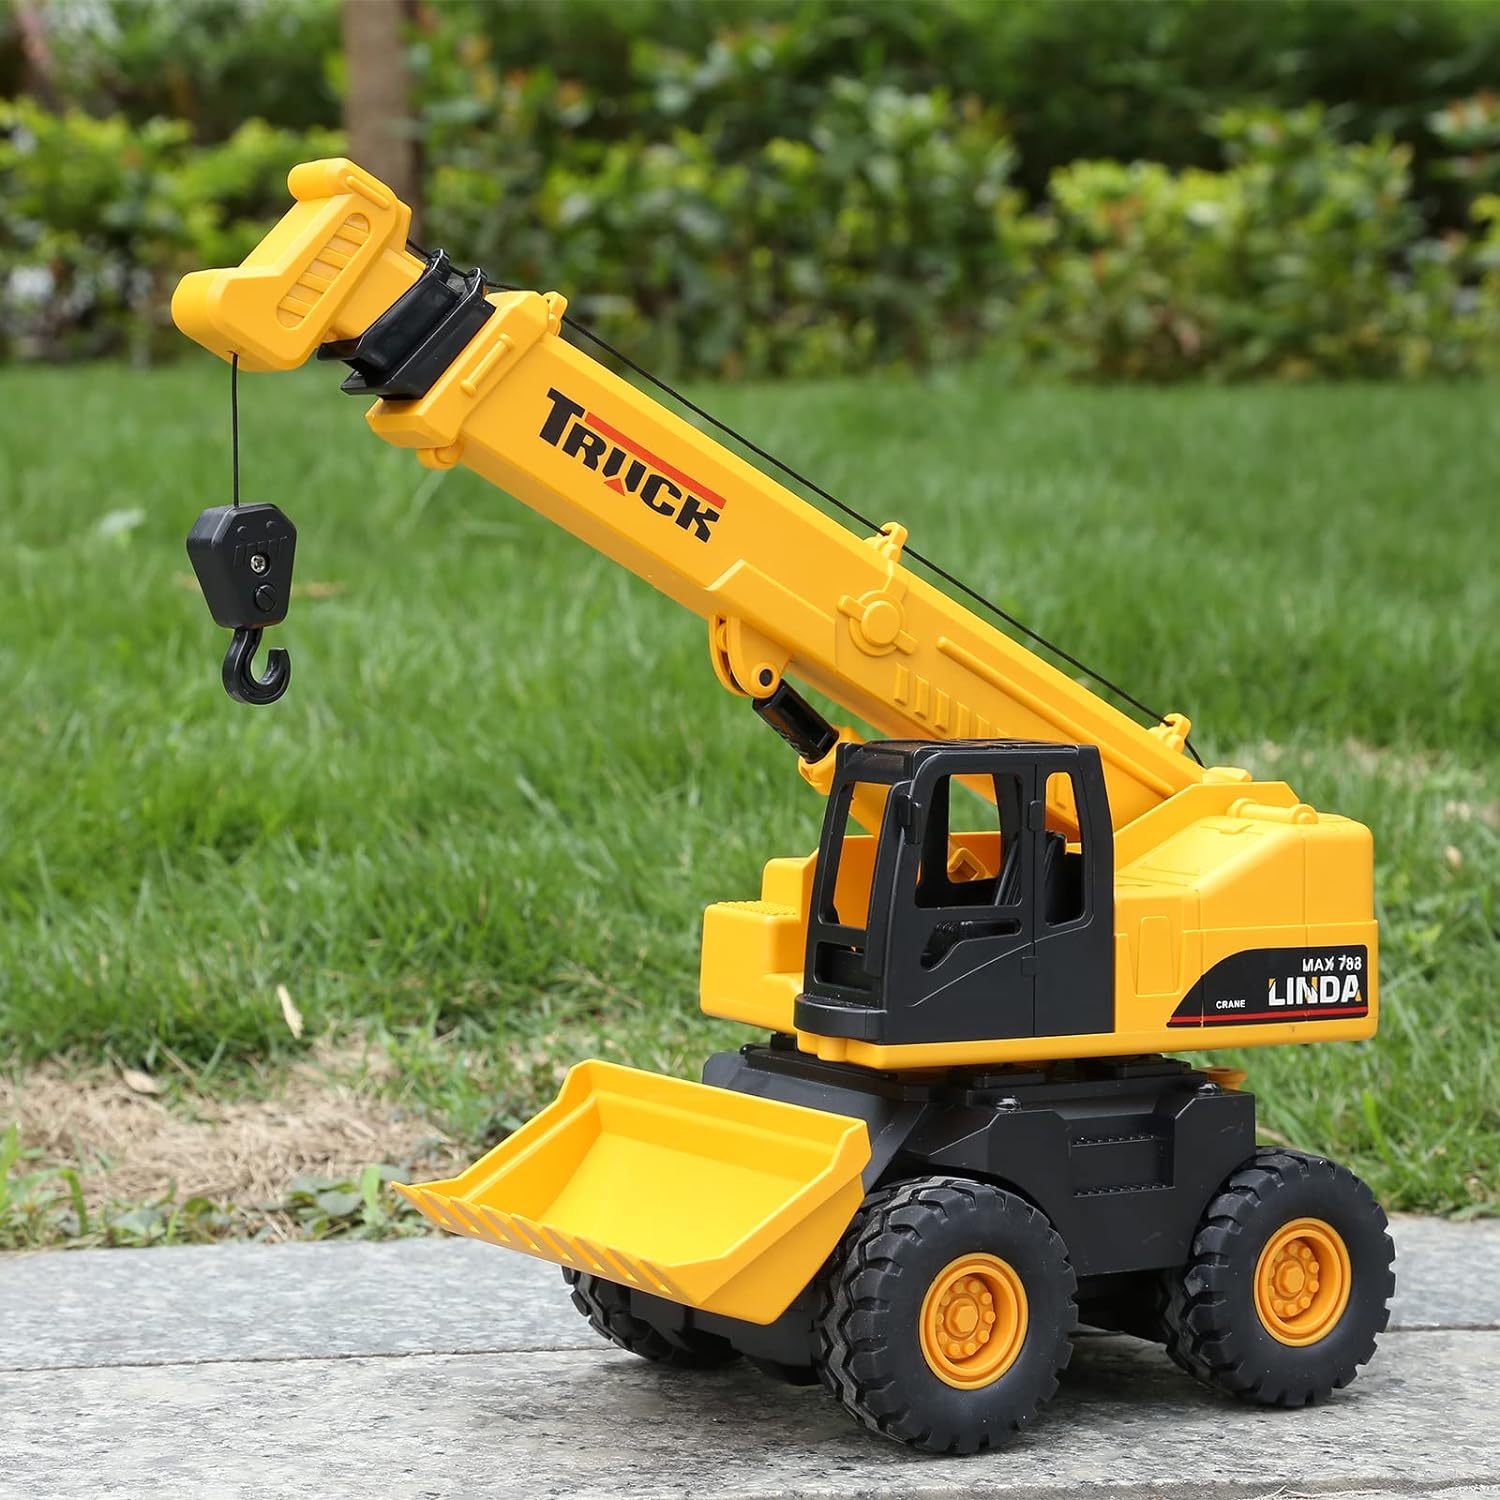 You are currently viewing haomsj 2-in-1 Crane and Excavator Construction Truck Toy Vehicles Building Toy Set Review